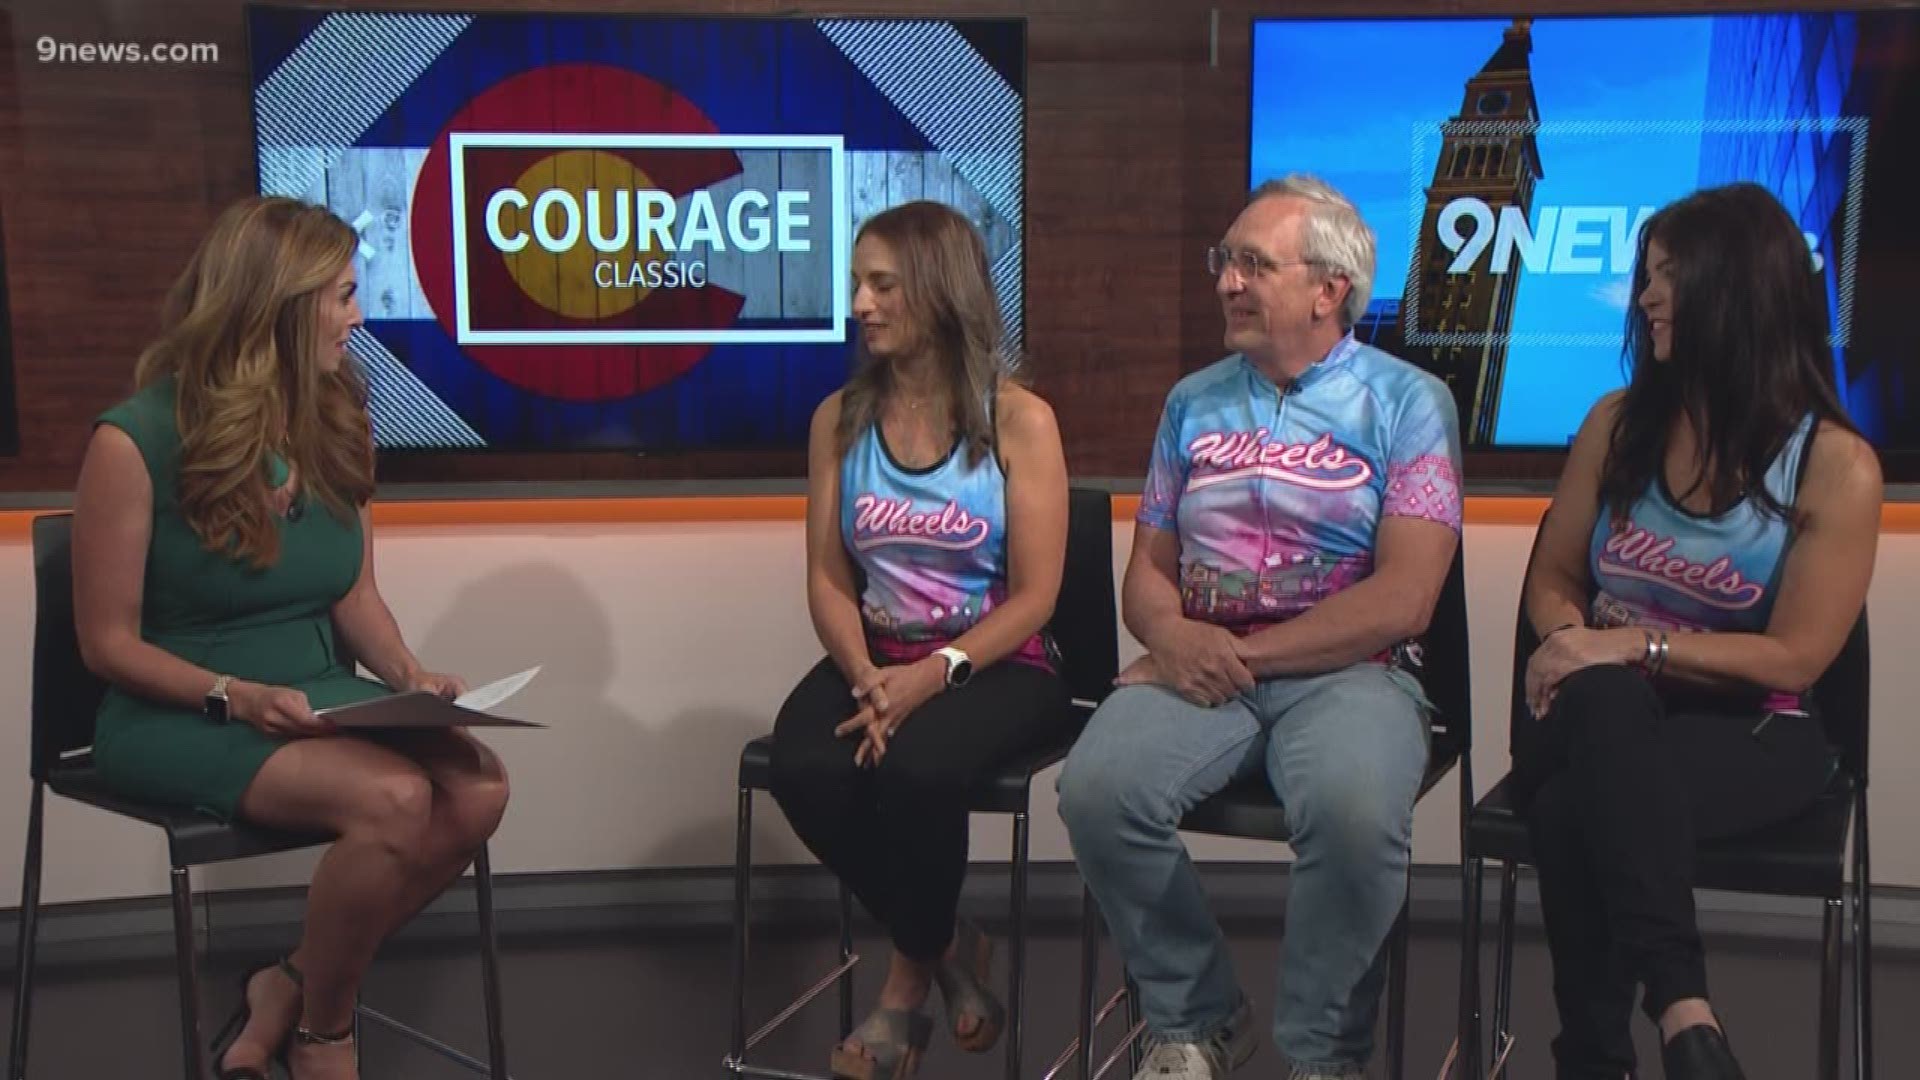 Regina Topelson, is a nutrition expert and breast cancer survivor. She participated in the Courage Classic as part of the Wheels of Justice team to support the Children's Hospital Colorado Foundation.